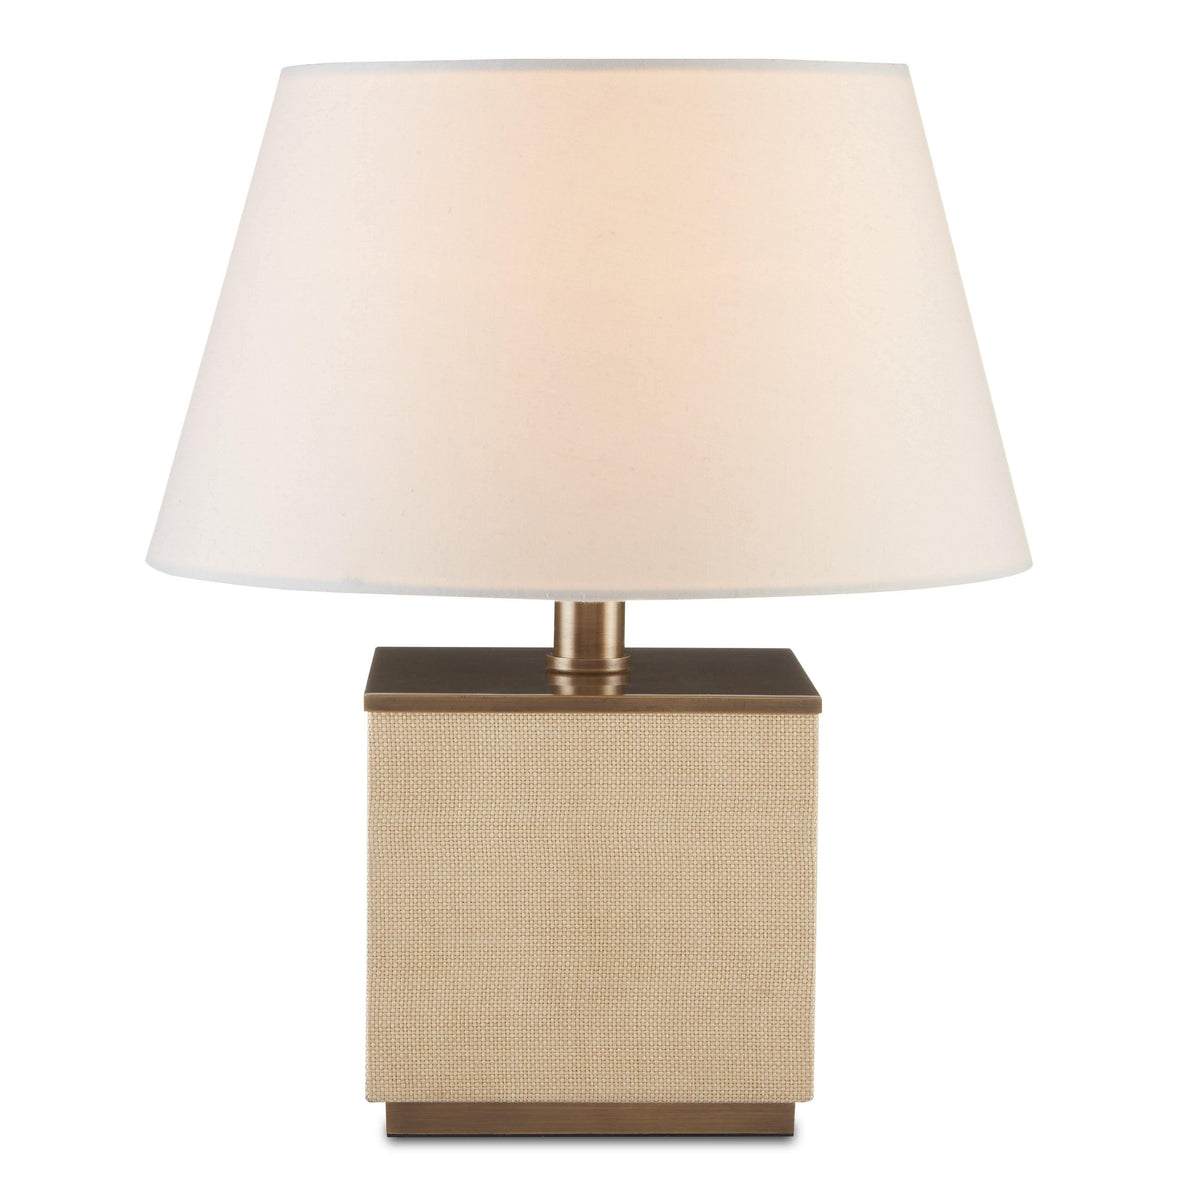 Currey and Company - Eloise Table Lamp - 6000-0693 | Montreal Lighting & Hardware